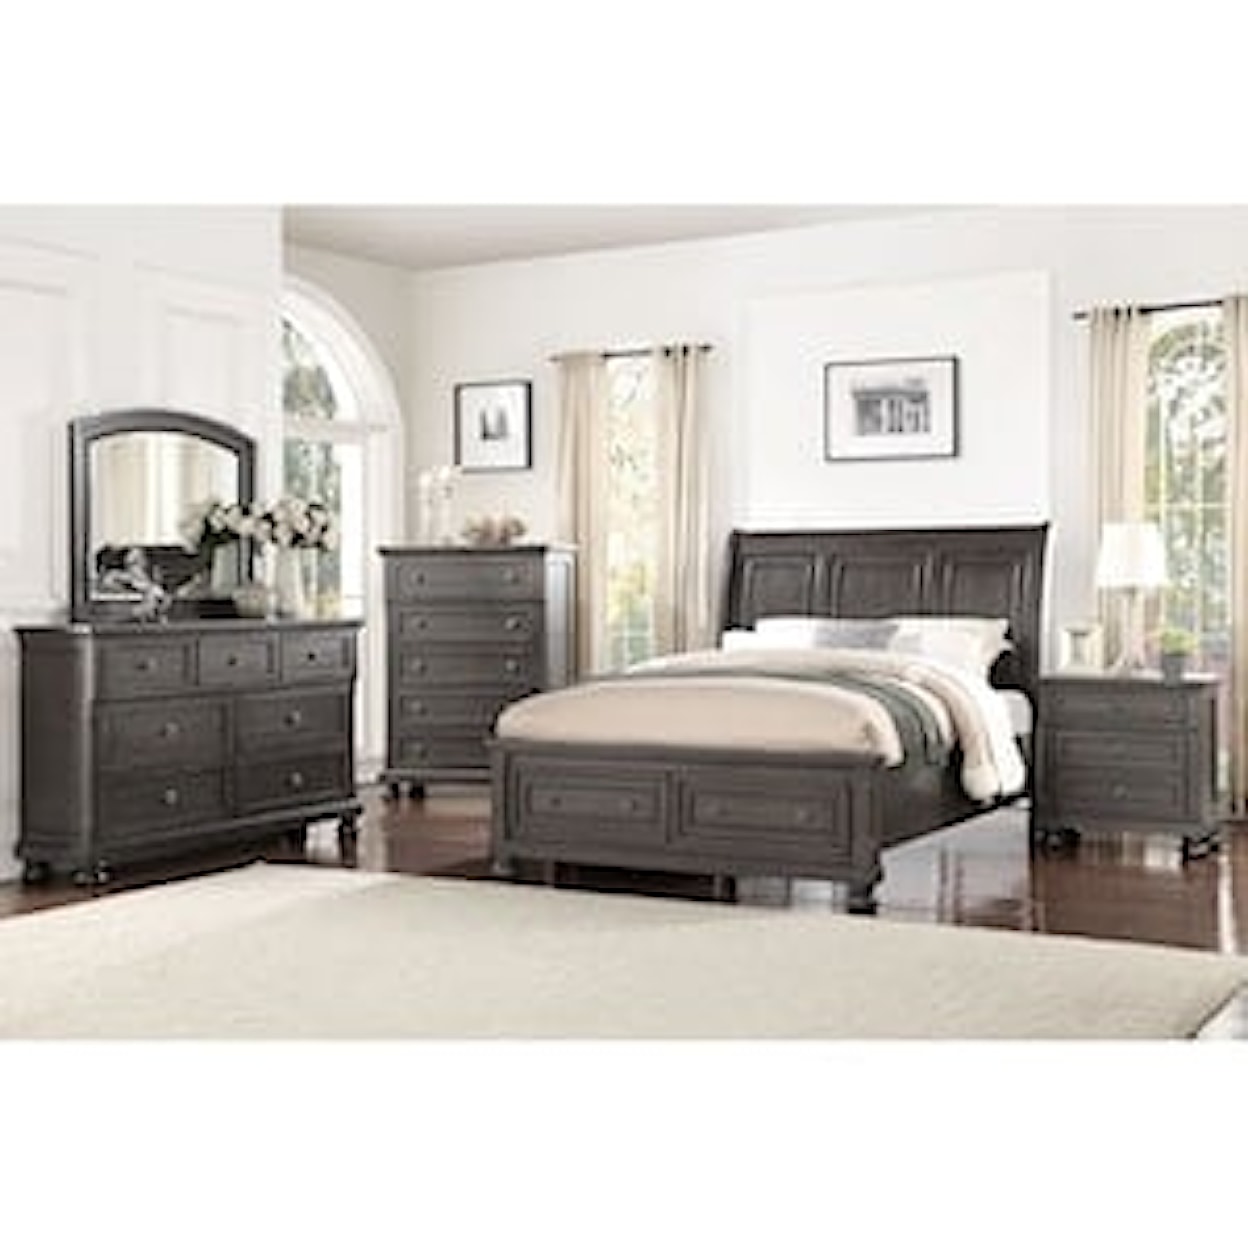 Avalon Furniture Stella B1061 Geey Queen 7pc Bedroom Group